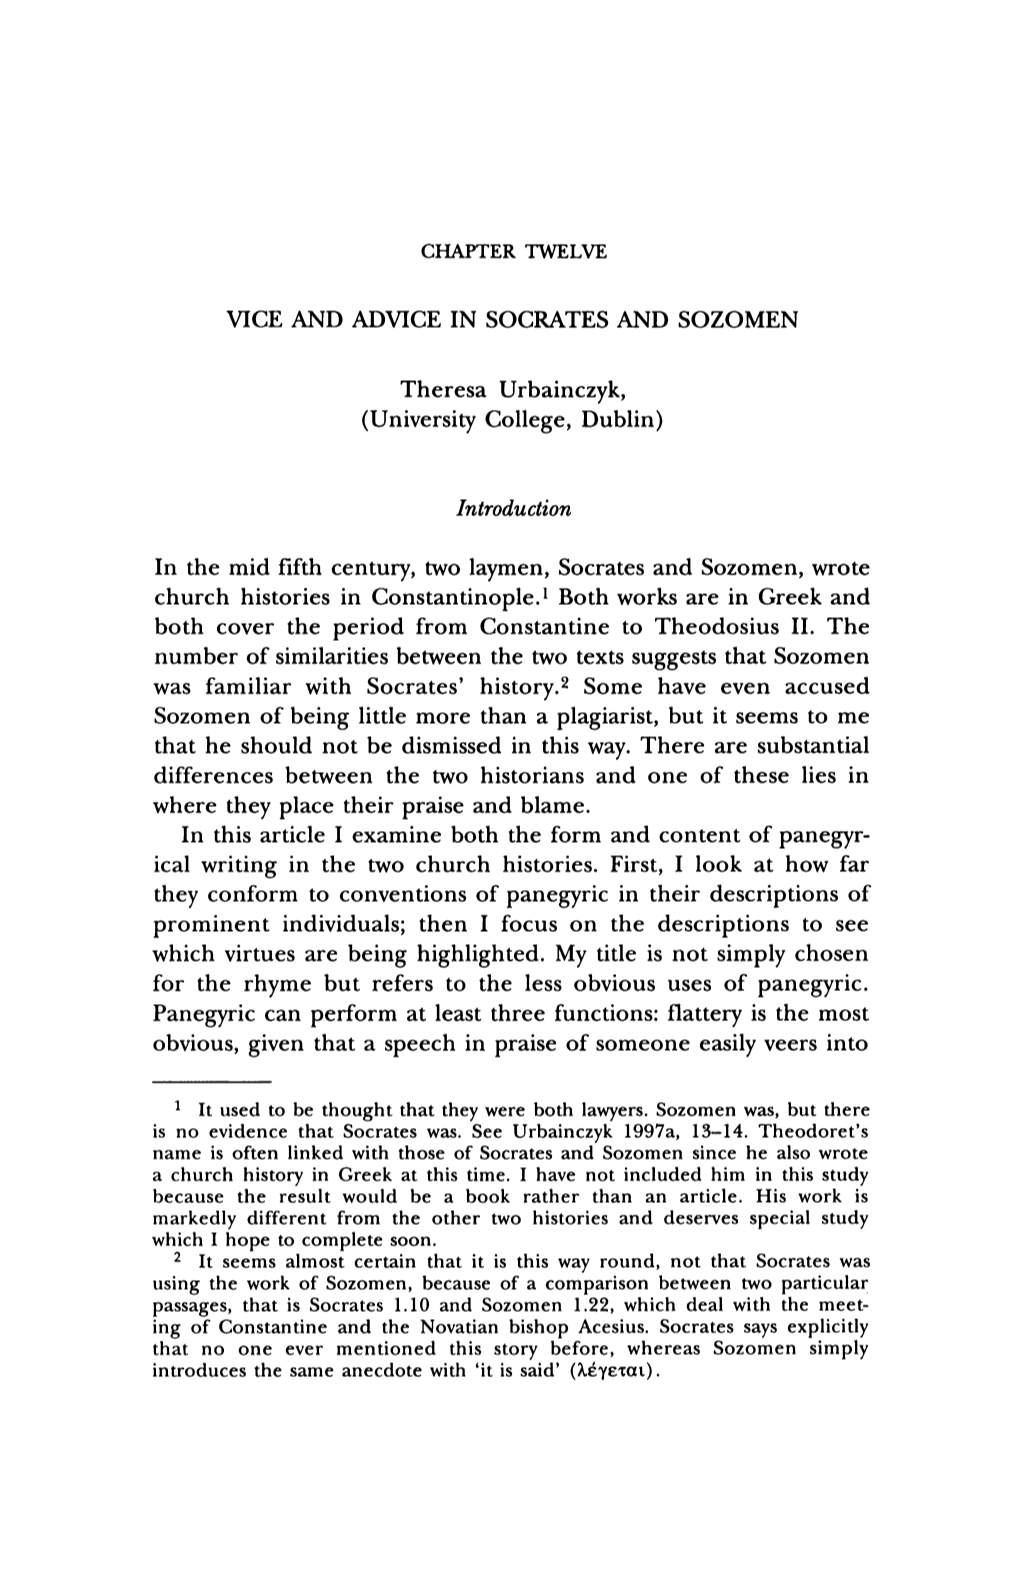 VICE and ADVICE in SOCRATES and SOZOMEN Theresa